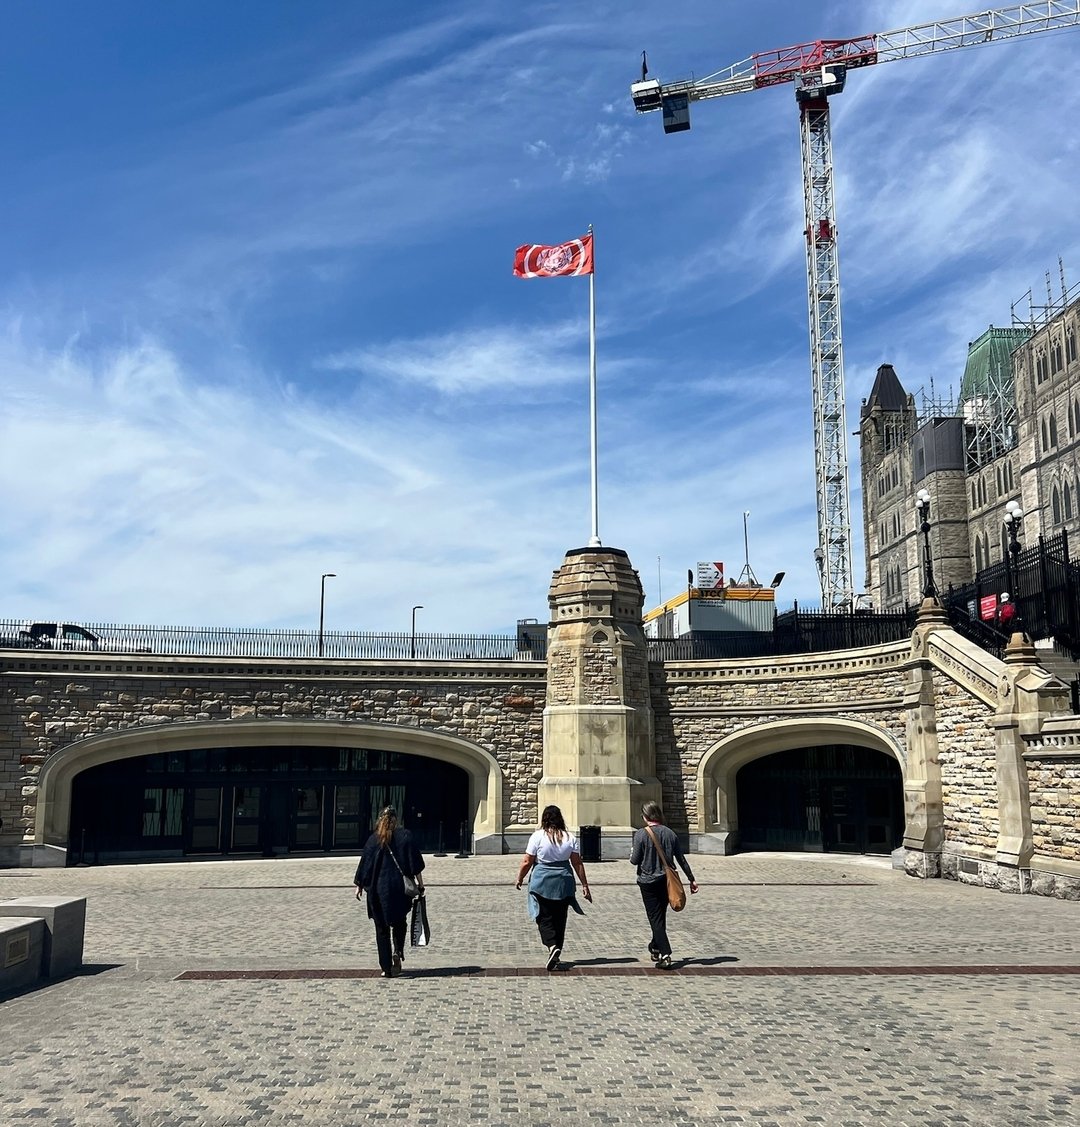 We had a wonderful time exploring Ottawa and connecting with our Pharmasave family last week during the Pharmasave National Conference &amp; Tradeshow! Swipe for a glimpse of some of our adventures! 

Have you visited Canada's capital city before?